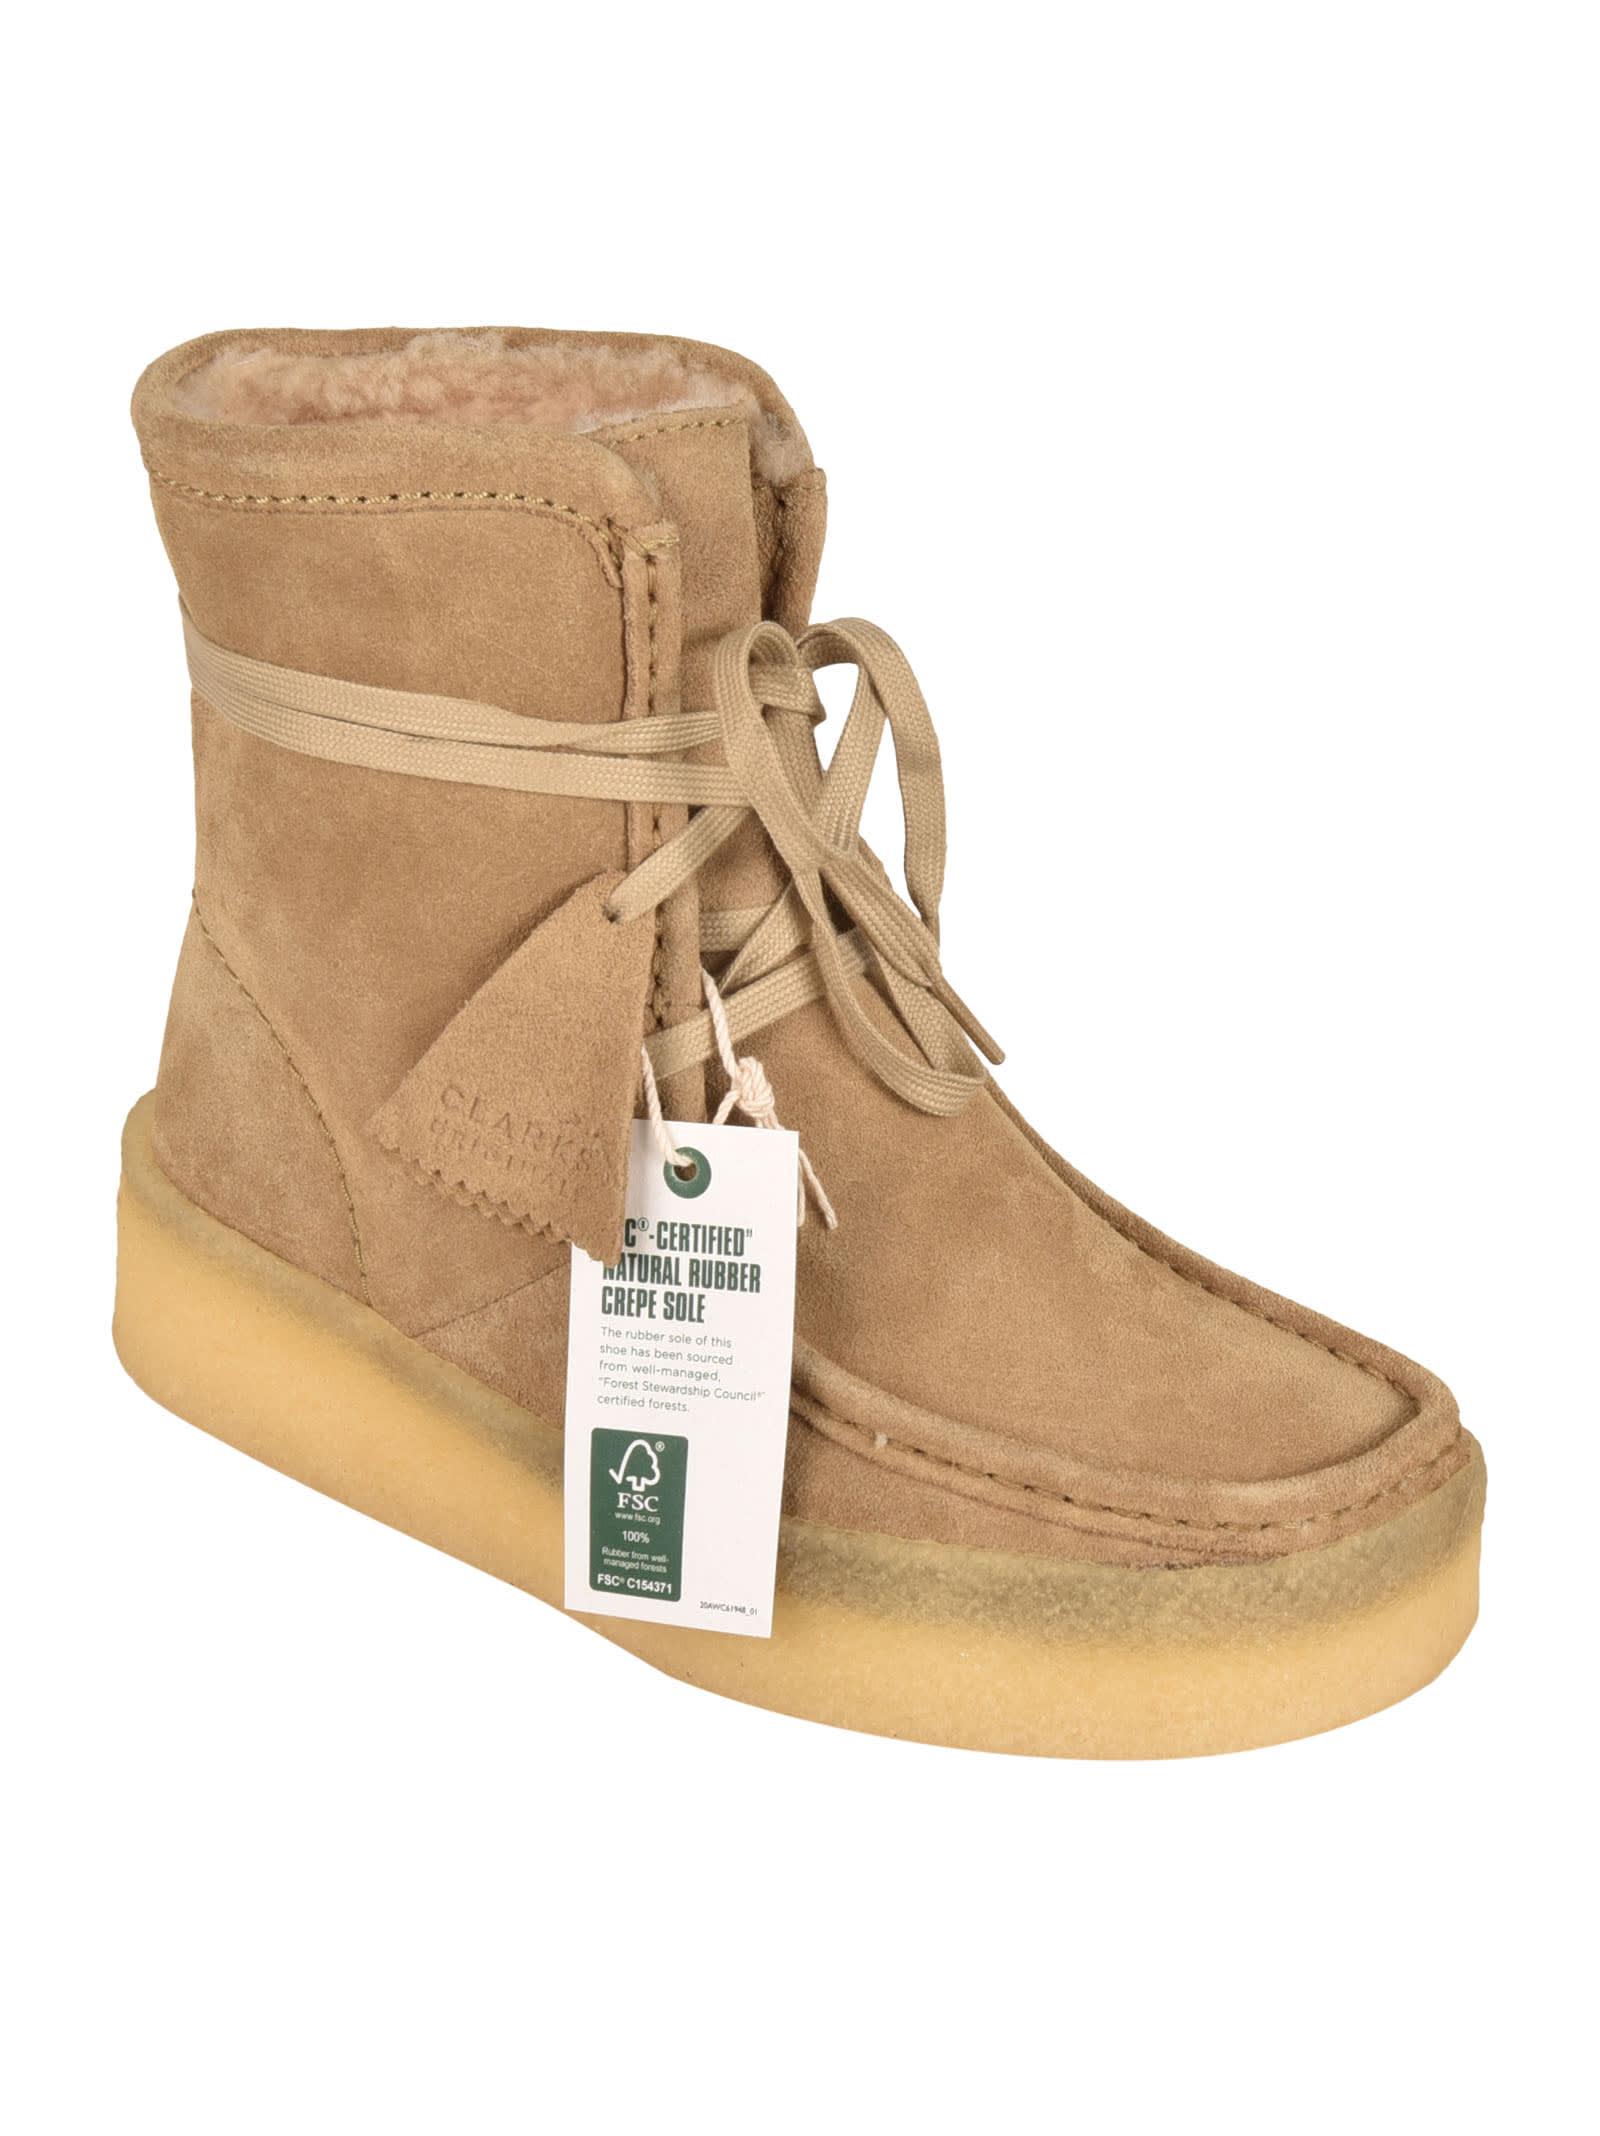 Clarks Wallabee Cup High Boots in Natural | Lyst